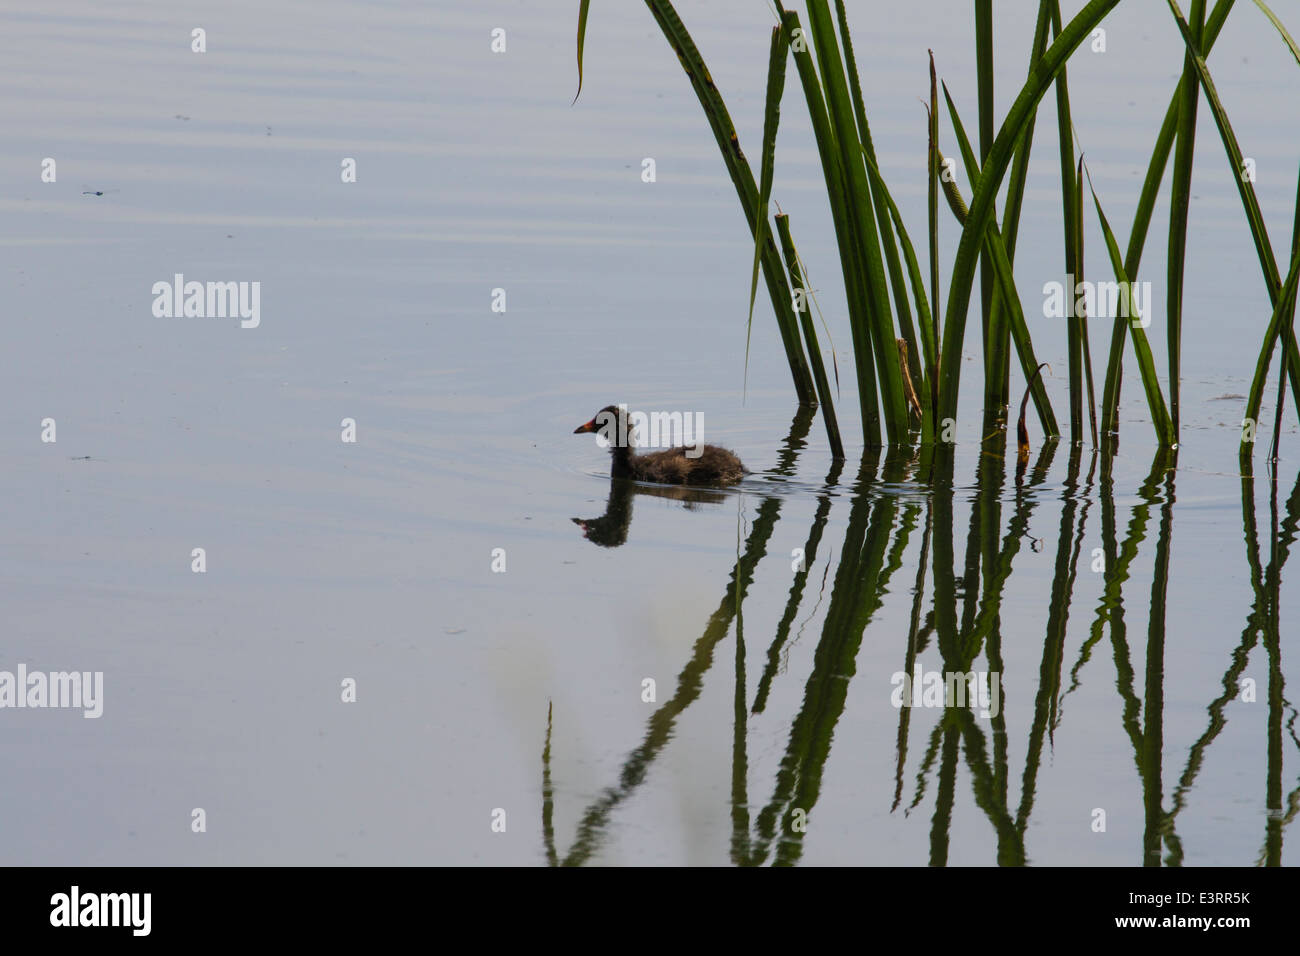 Little Grebe (Tachybaptus ruficollis) also known as Dabchick, swimming amongst reeds Stock Photo